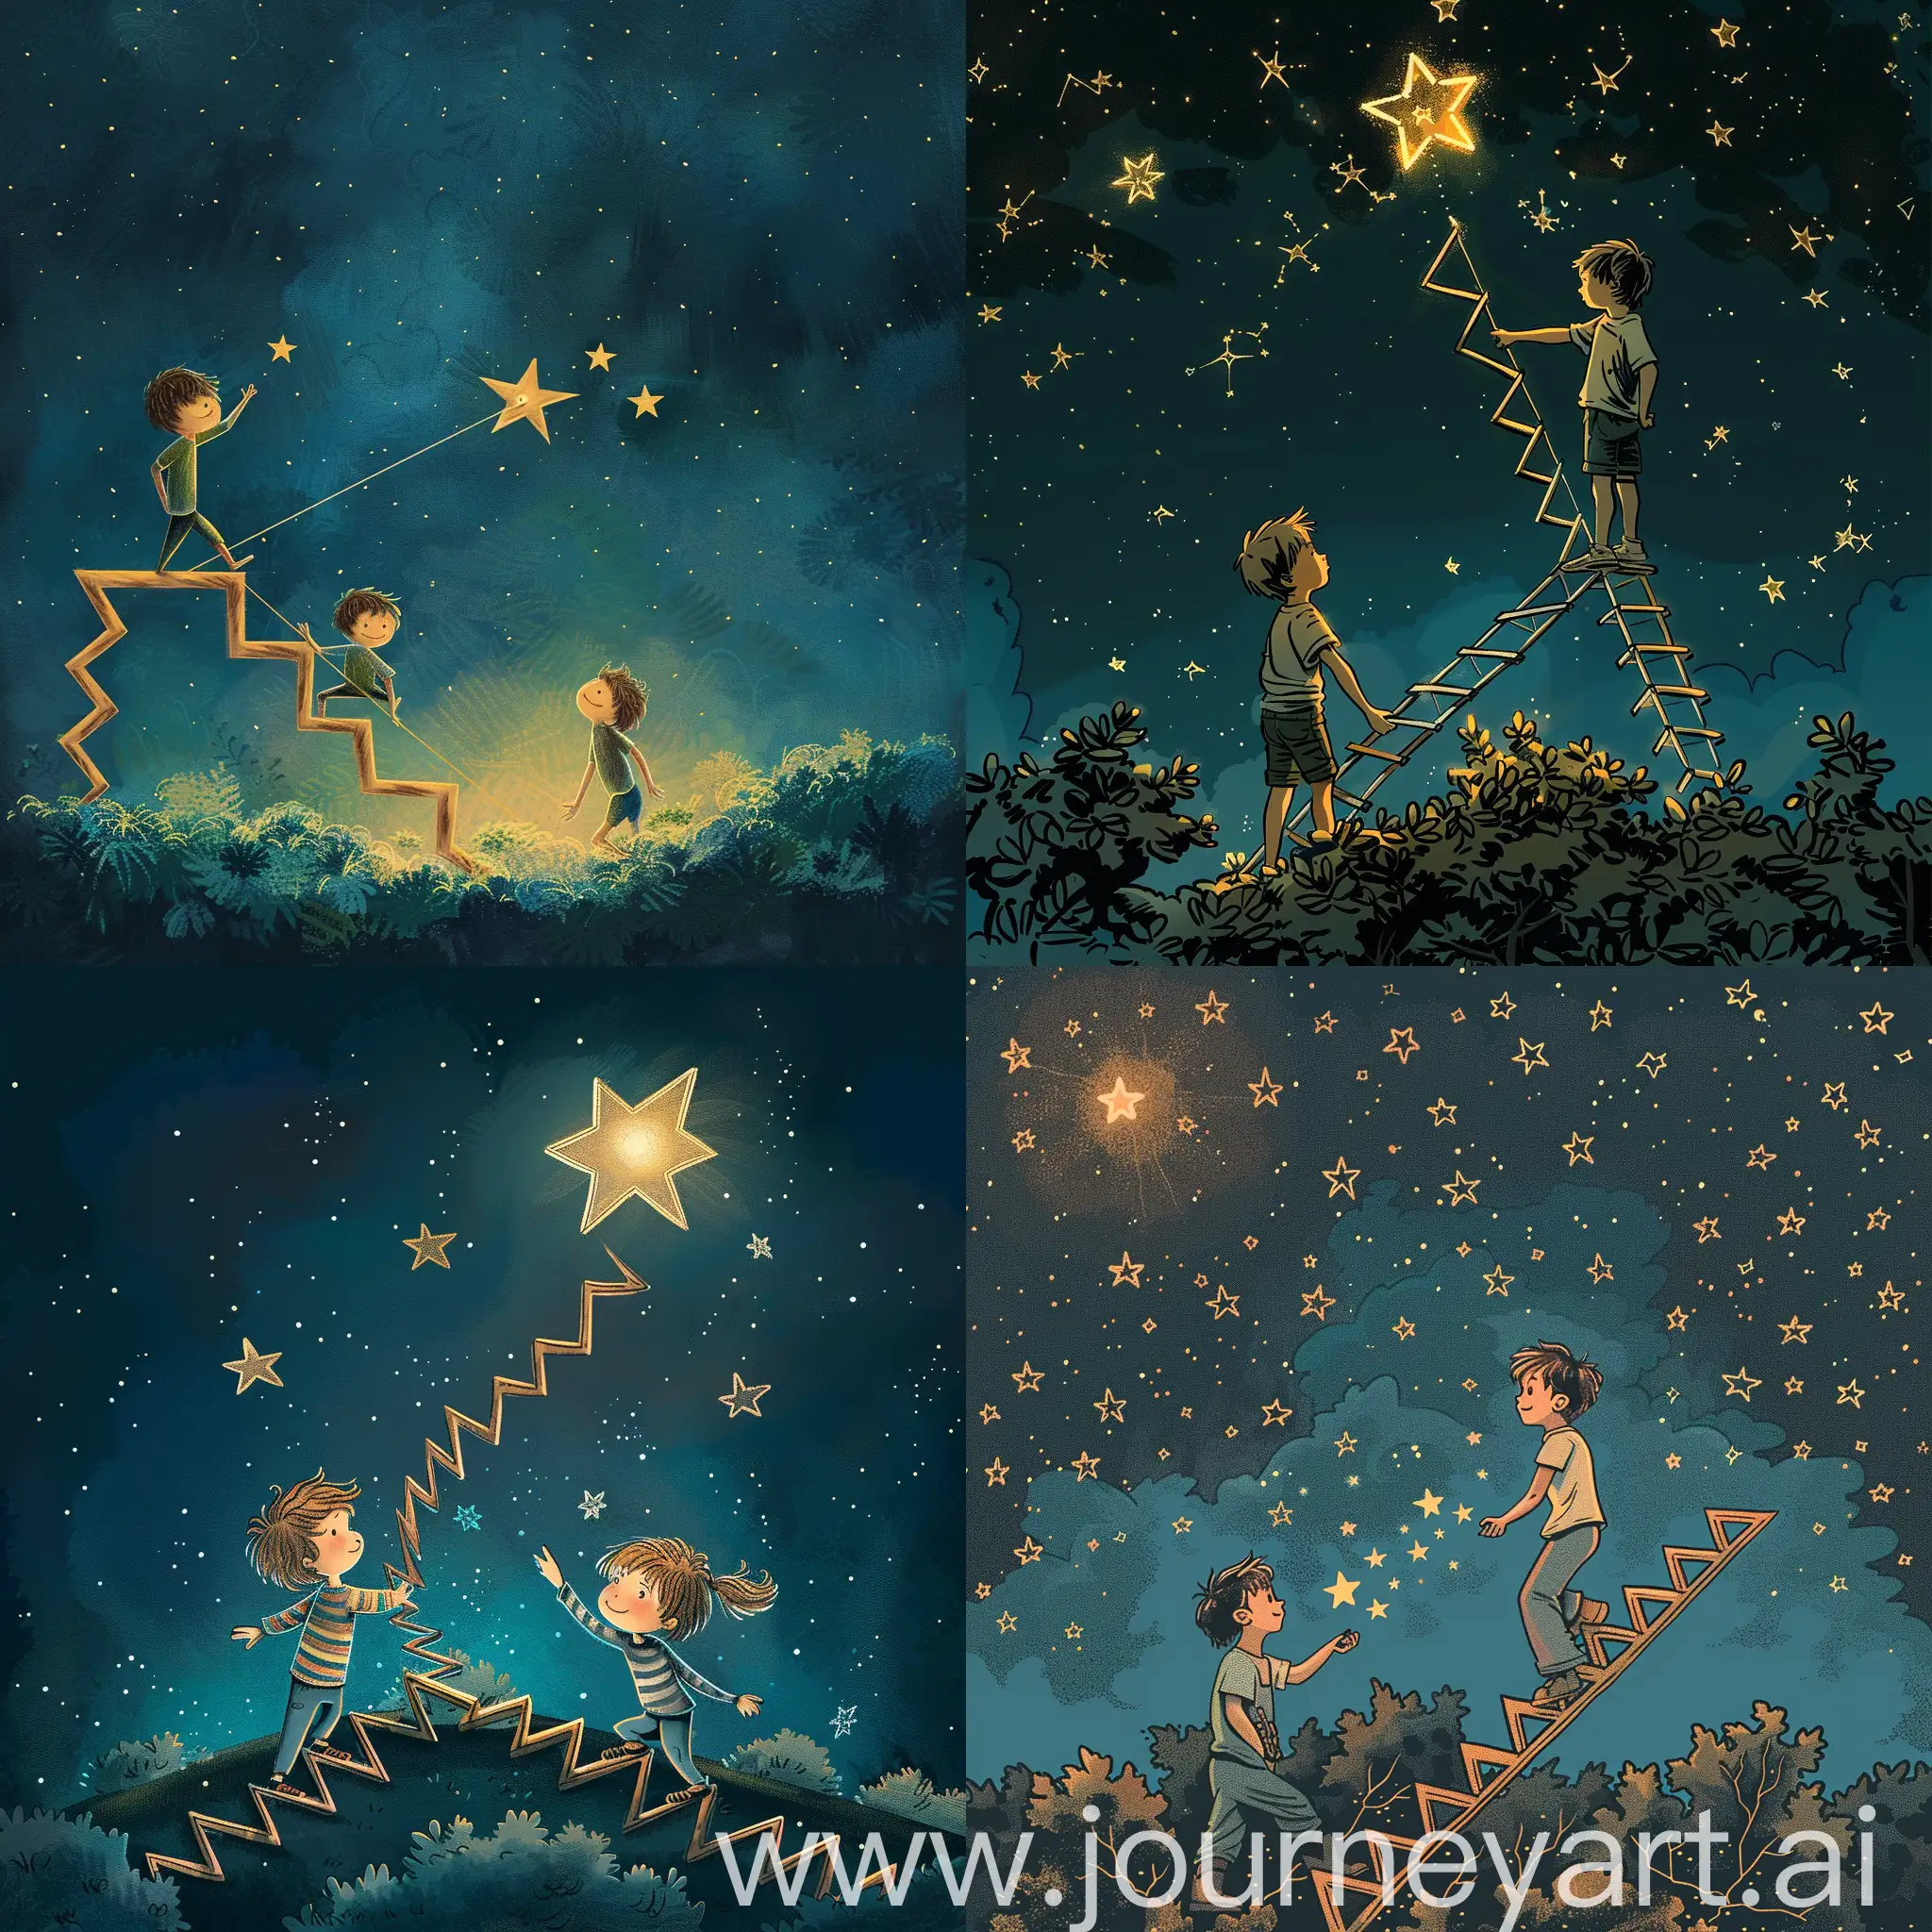 Youths-Collecting-Stars-on-Zigzag-Ladder-under-Starlight